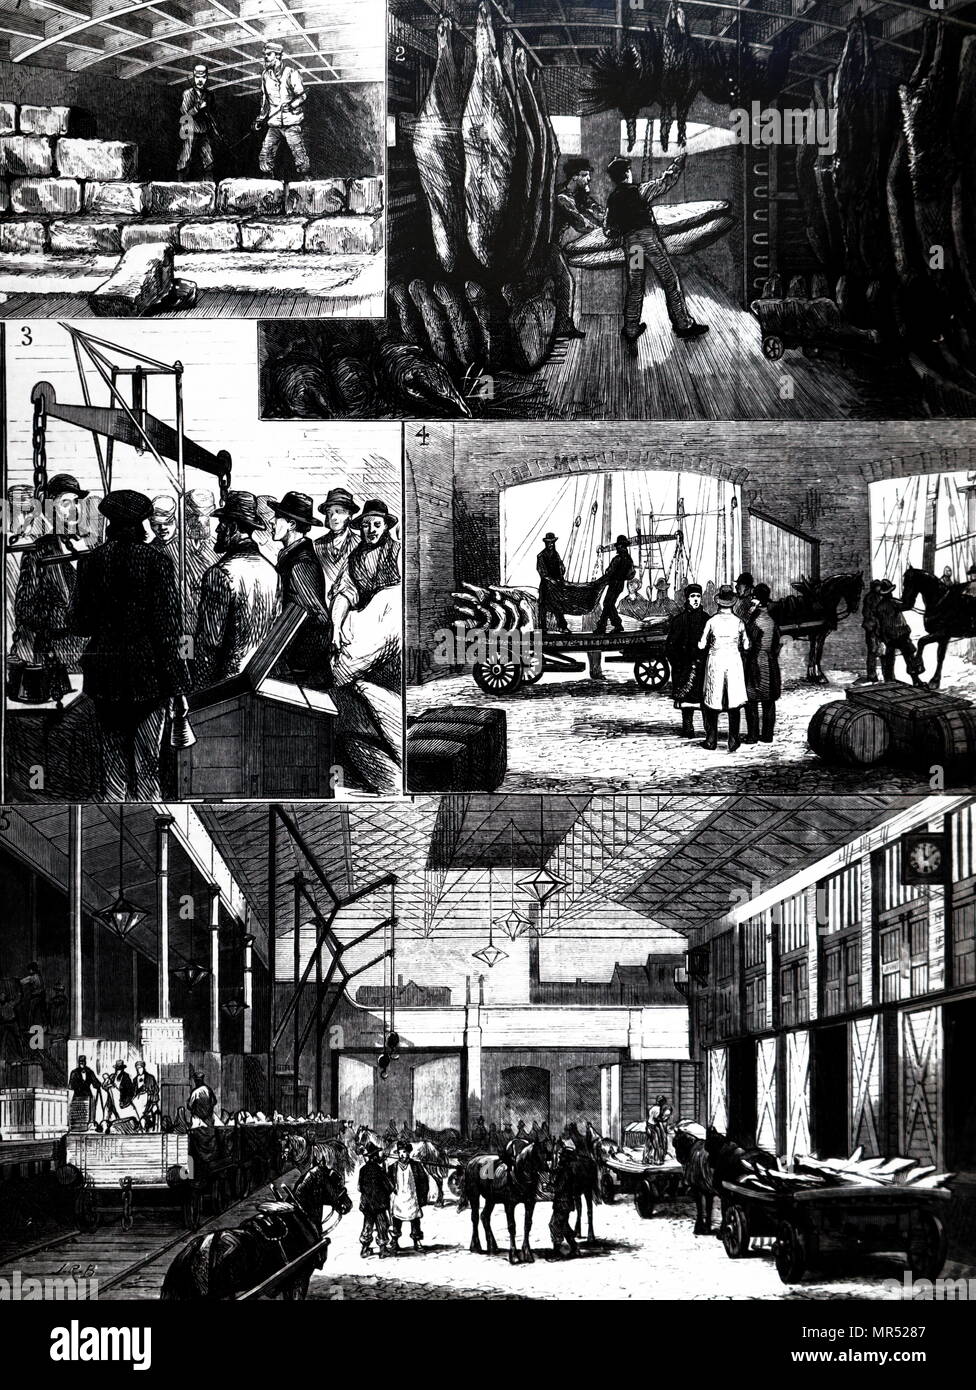 Engraving depicting the process of moving chilled meat from the US to Liverpool aboard the Ohio. 1) Ice store between decks. 2) Sending meat up from the refrigerated hold. 3)Weighing of meat. 4) Loading floats (carts): the one shown bears the name of the London and North Western Railway. 5) Loading meat on the LNWR trains for distribution. Dated 19th century Stock Photo